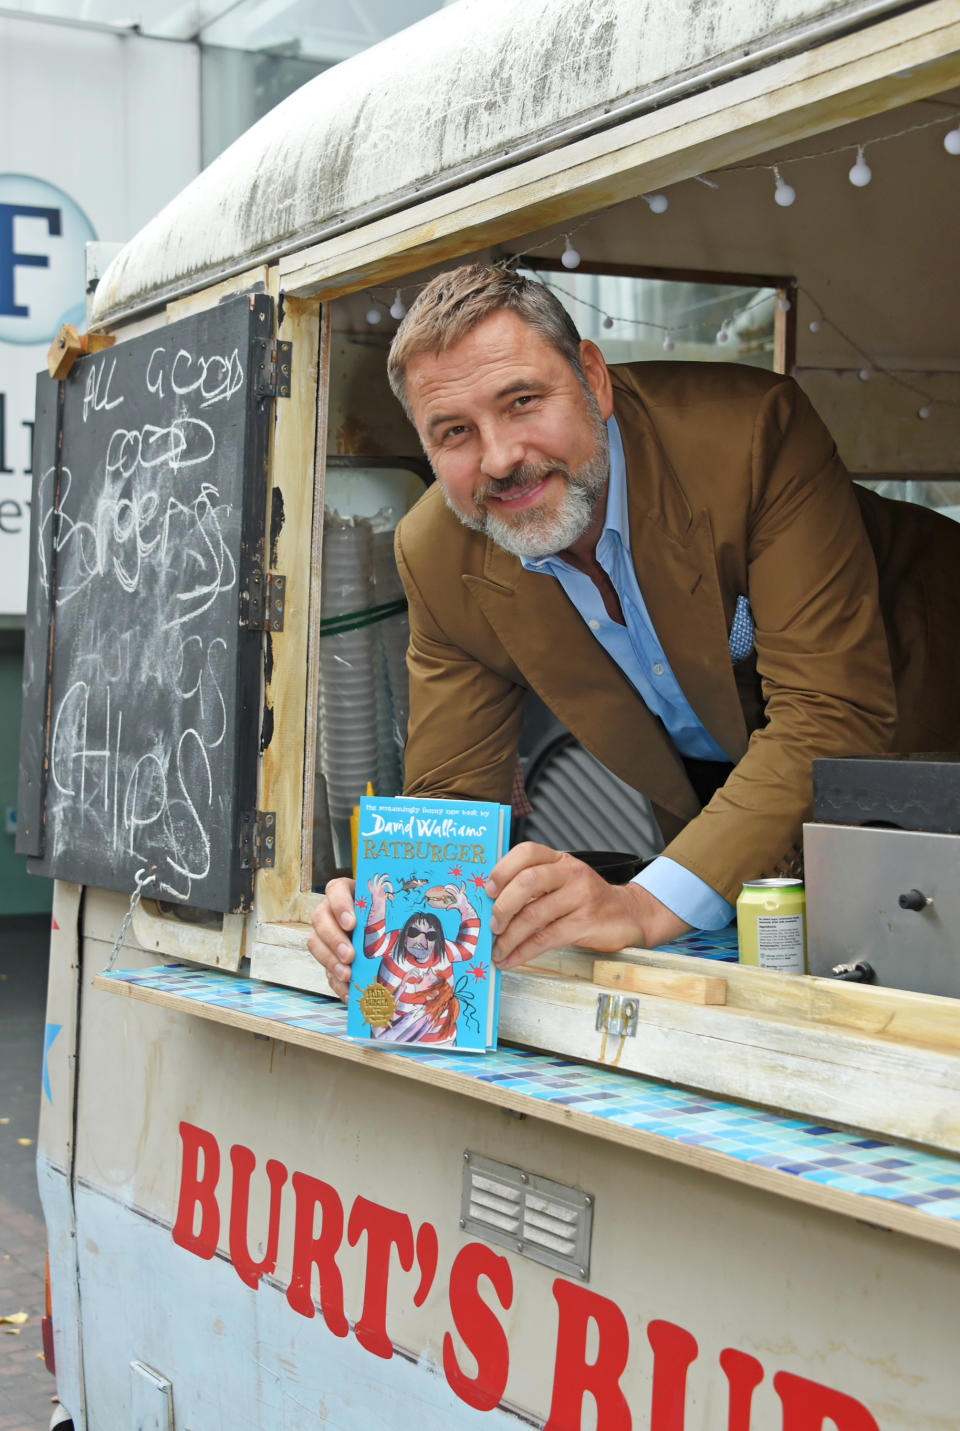 David Walliams attends a BFI Southbank preview of &quot;Ratburger&quot;, Sky 1's TV adaptation of his book published by HarperCollins, on September 3, 2017 in London, United Kingdom.  (Photo by David M. Benett/Dave Benett/Getty Images for BFI )